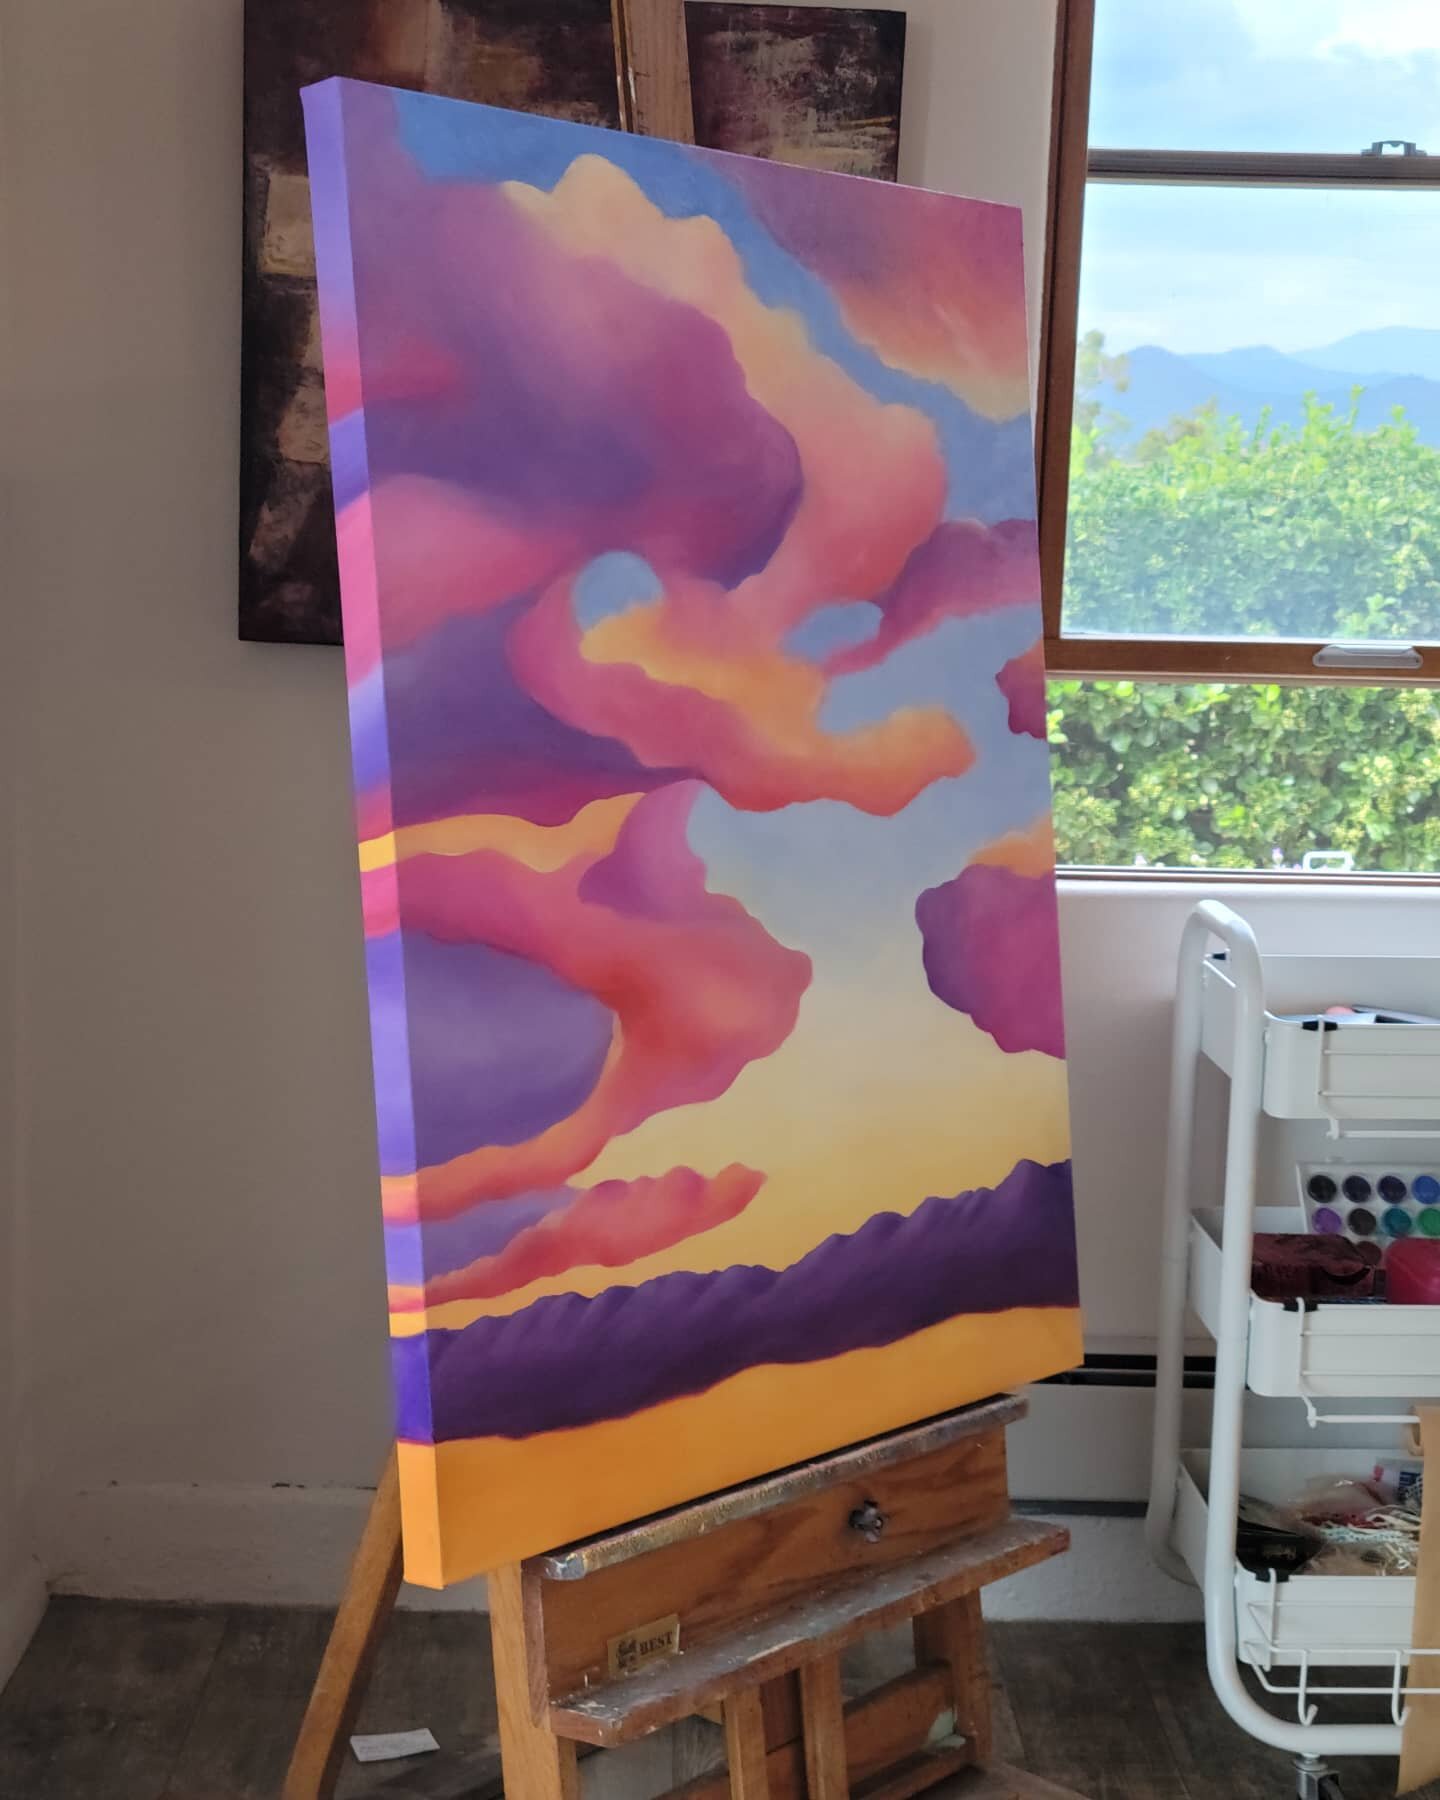 I love painting the edges of the canvas...brings the piece together. Also enjoy the view of the Sangre de Cristo mountains out my studio window. #sunsetpainting #santafeskies #colorfulabstractart #contempoaryartist #abstractartist #desertsunset #onth